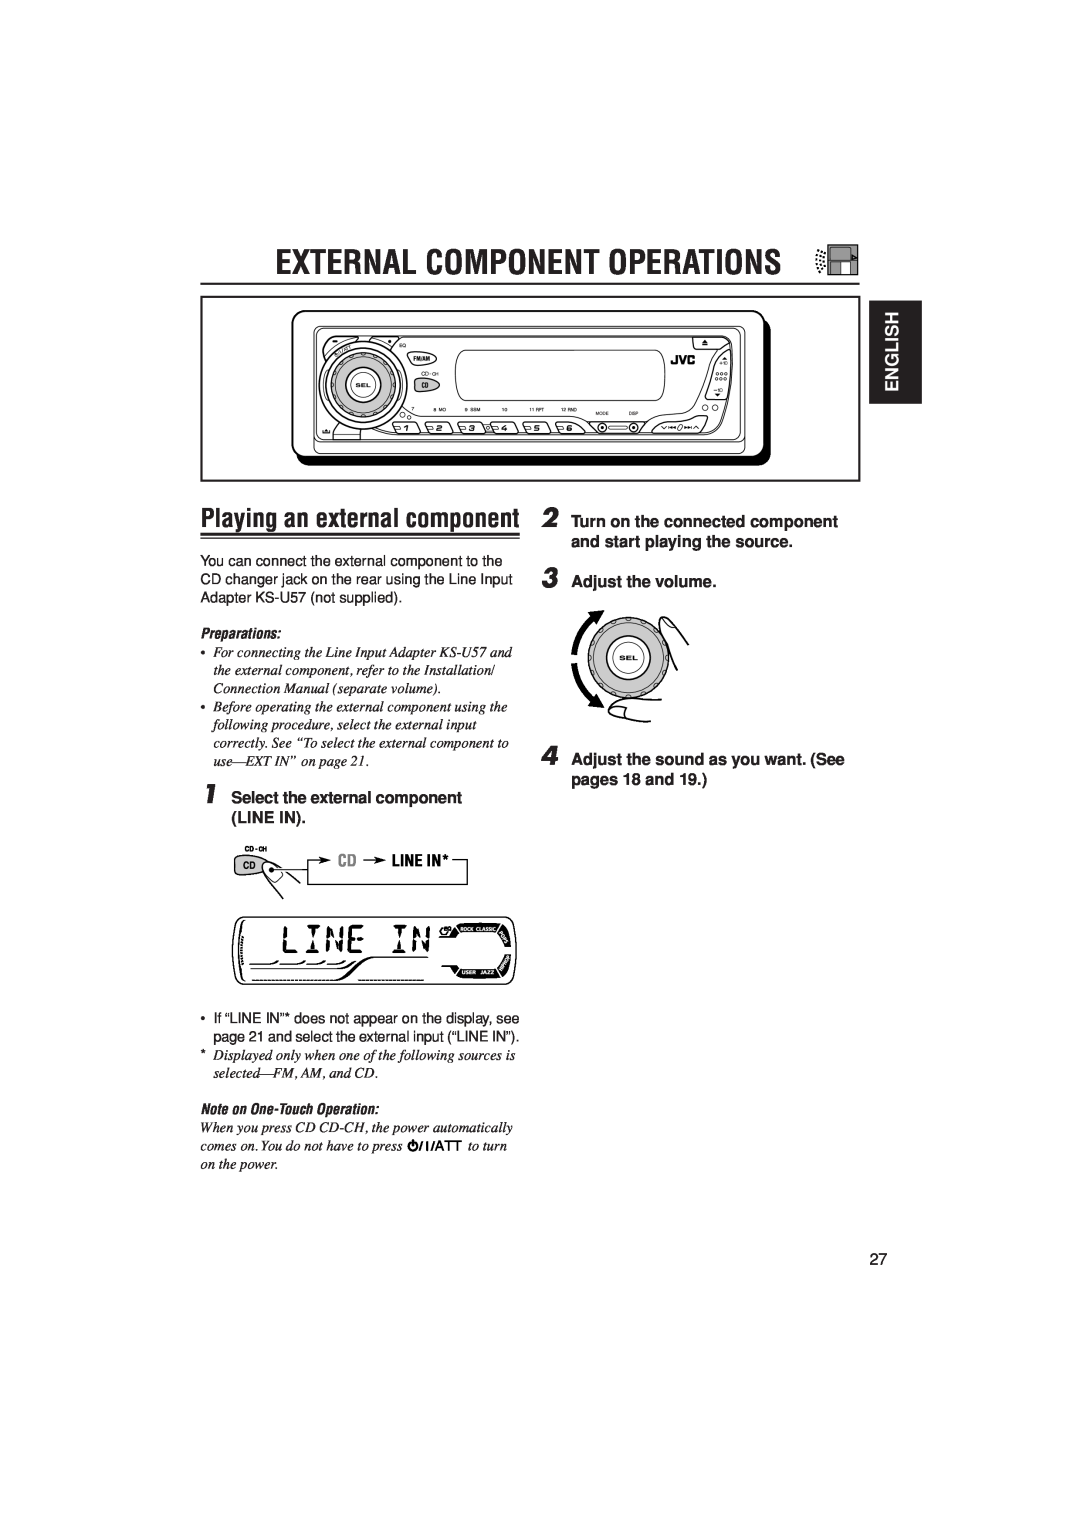 JVC KD-G305 External Component Operations, Playing an external component, English, Select the external component LINE IN 